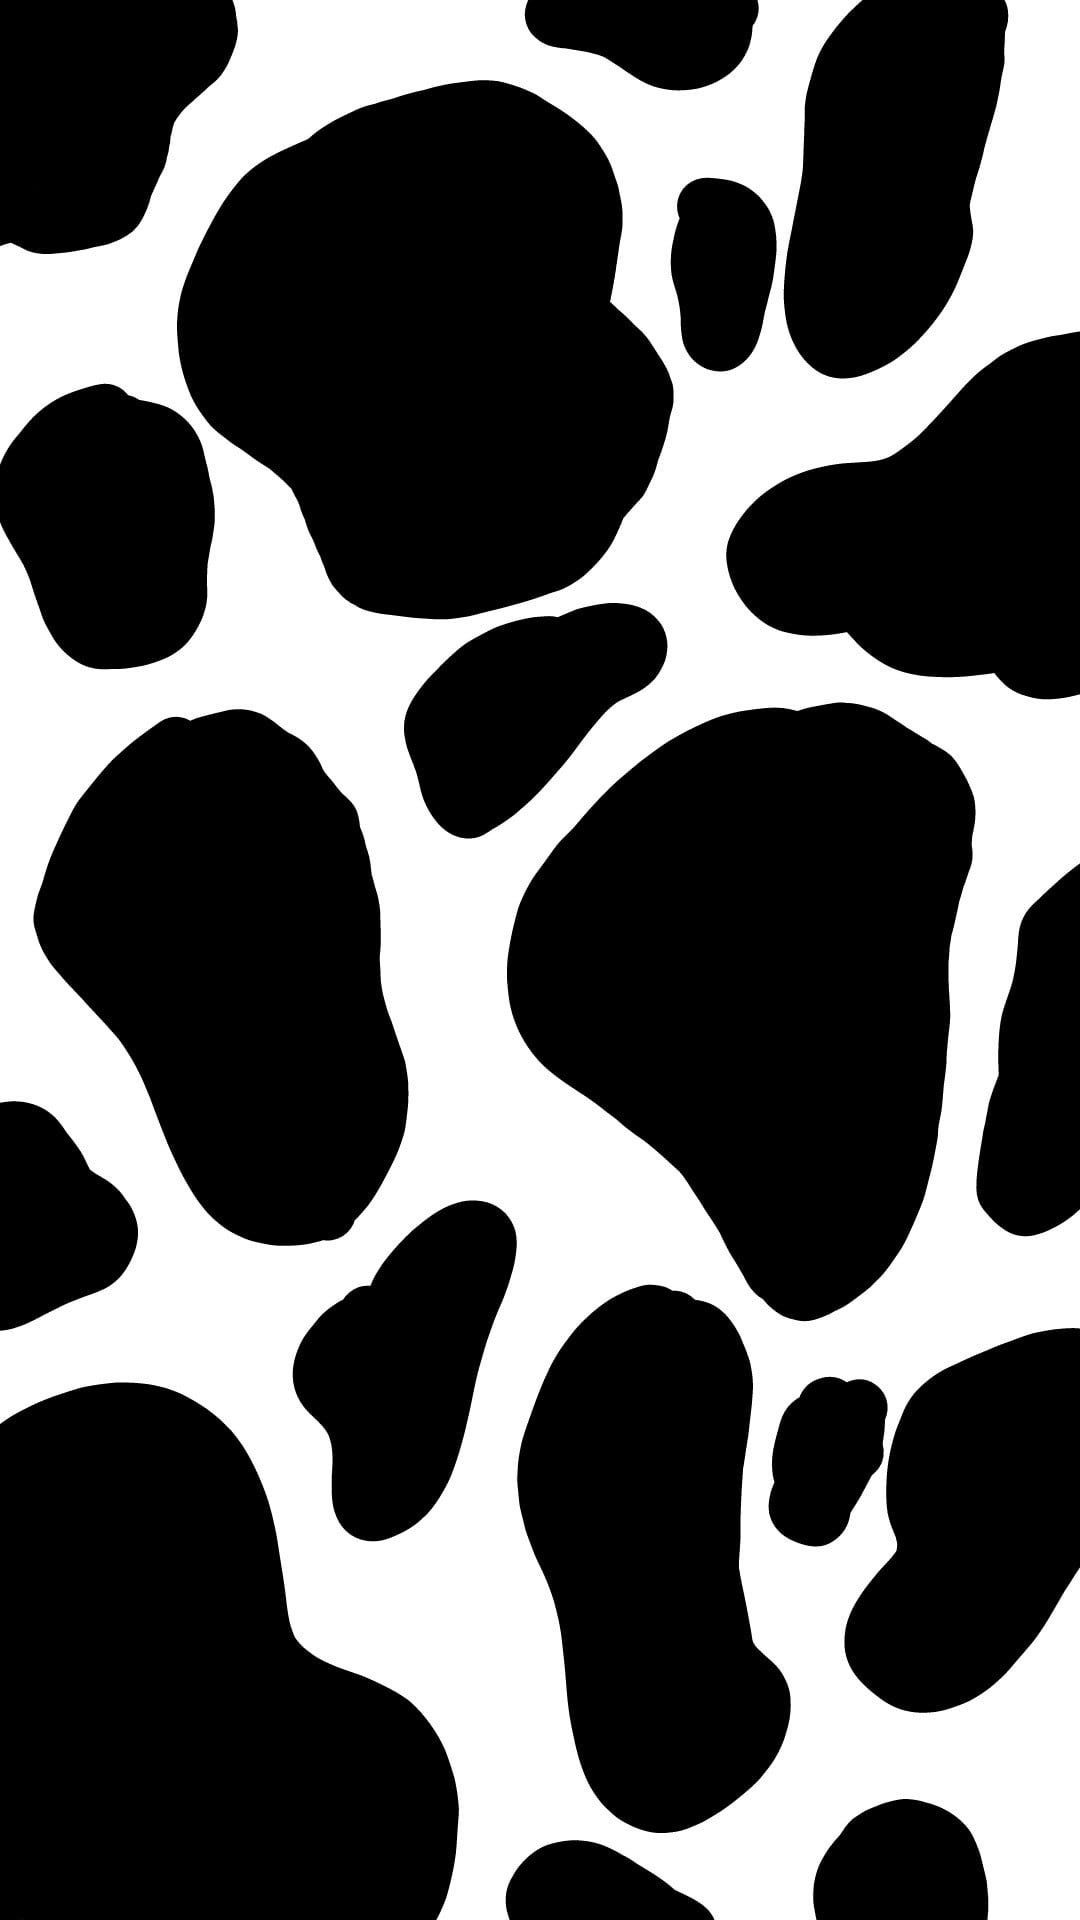 A black and white pattern of rocks - Pretty, cow